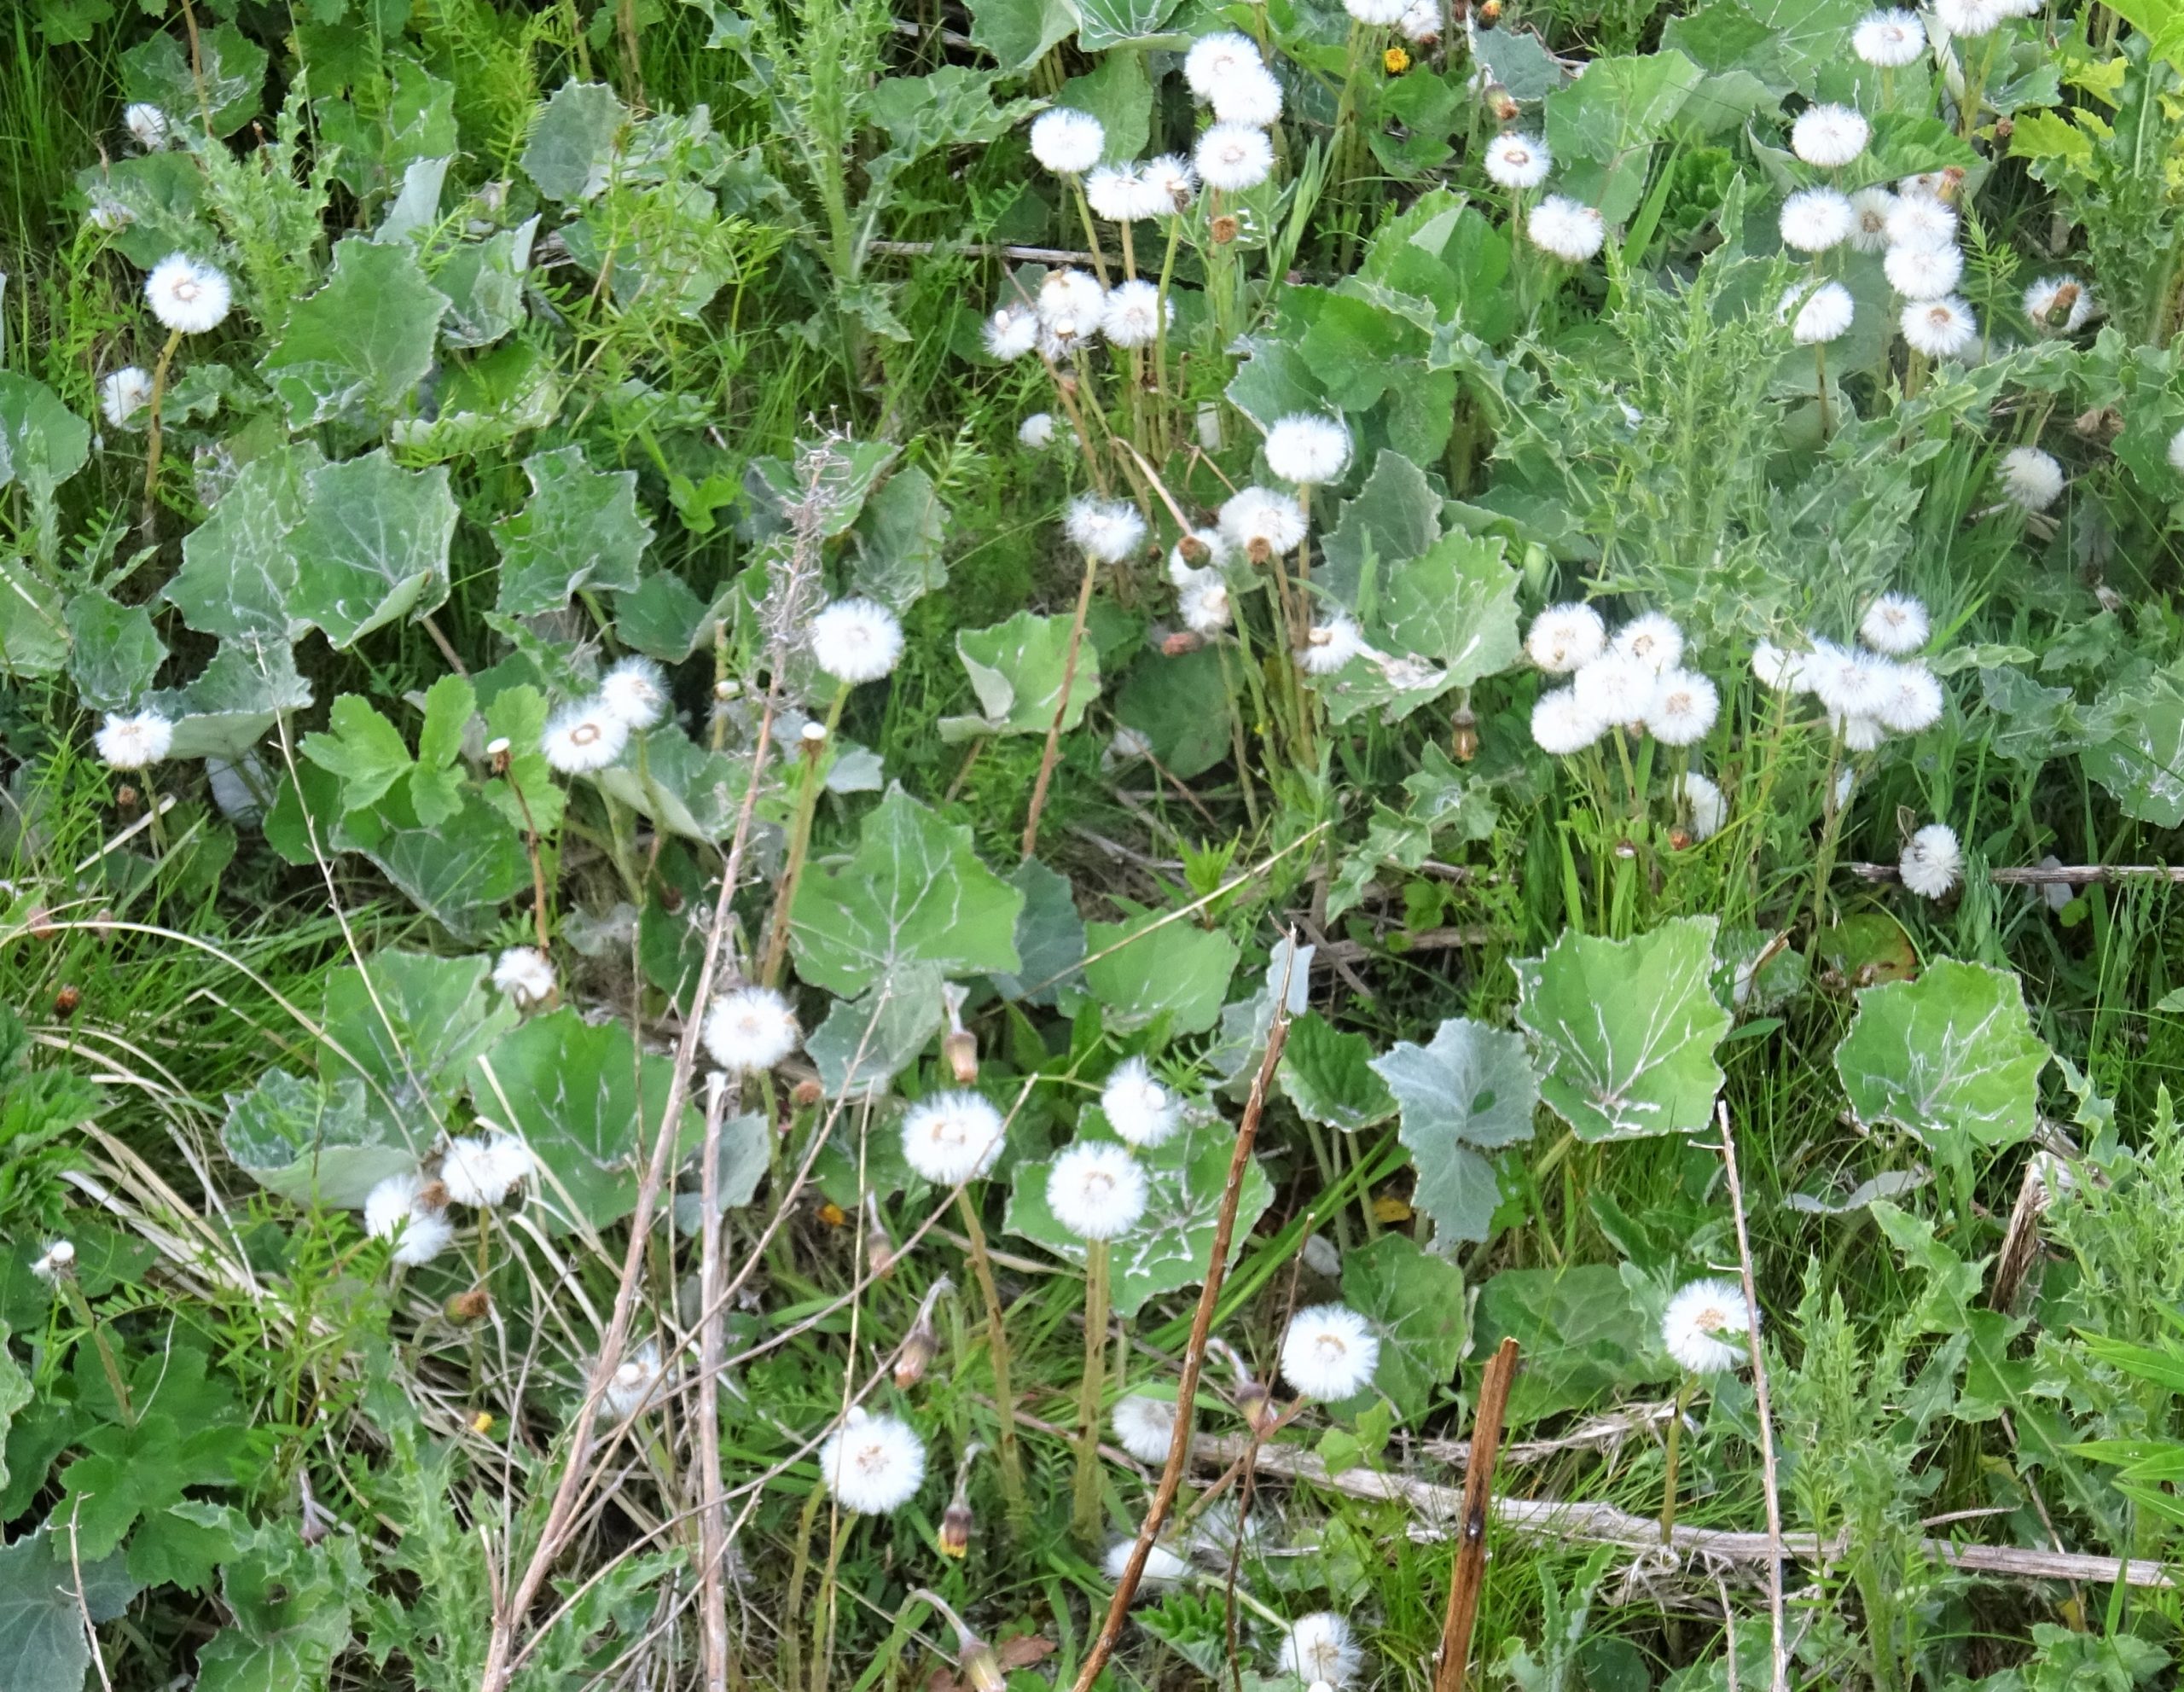 A group of white, fluffy coltsfoot flowers that grow with leaves and other plants surrounding it